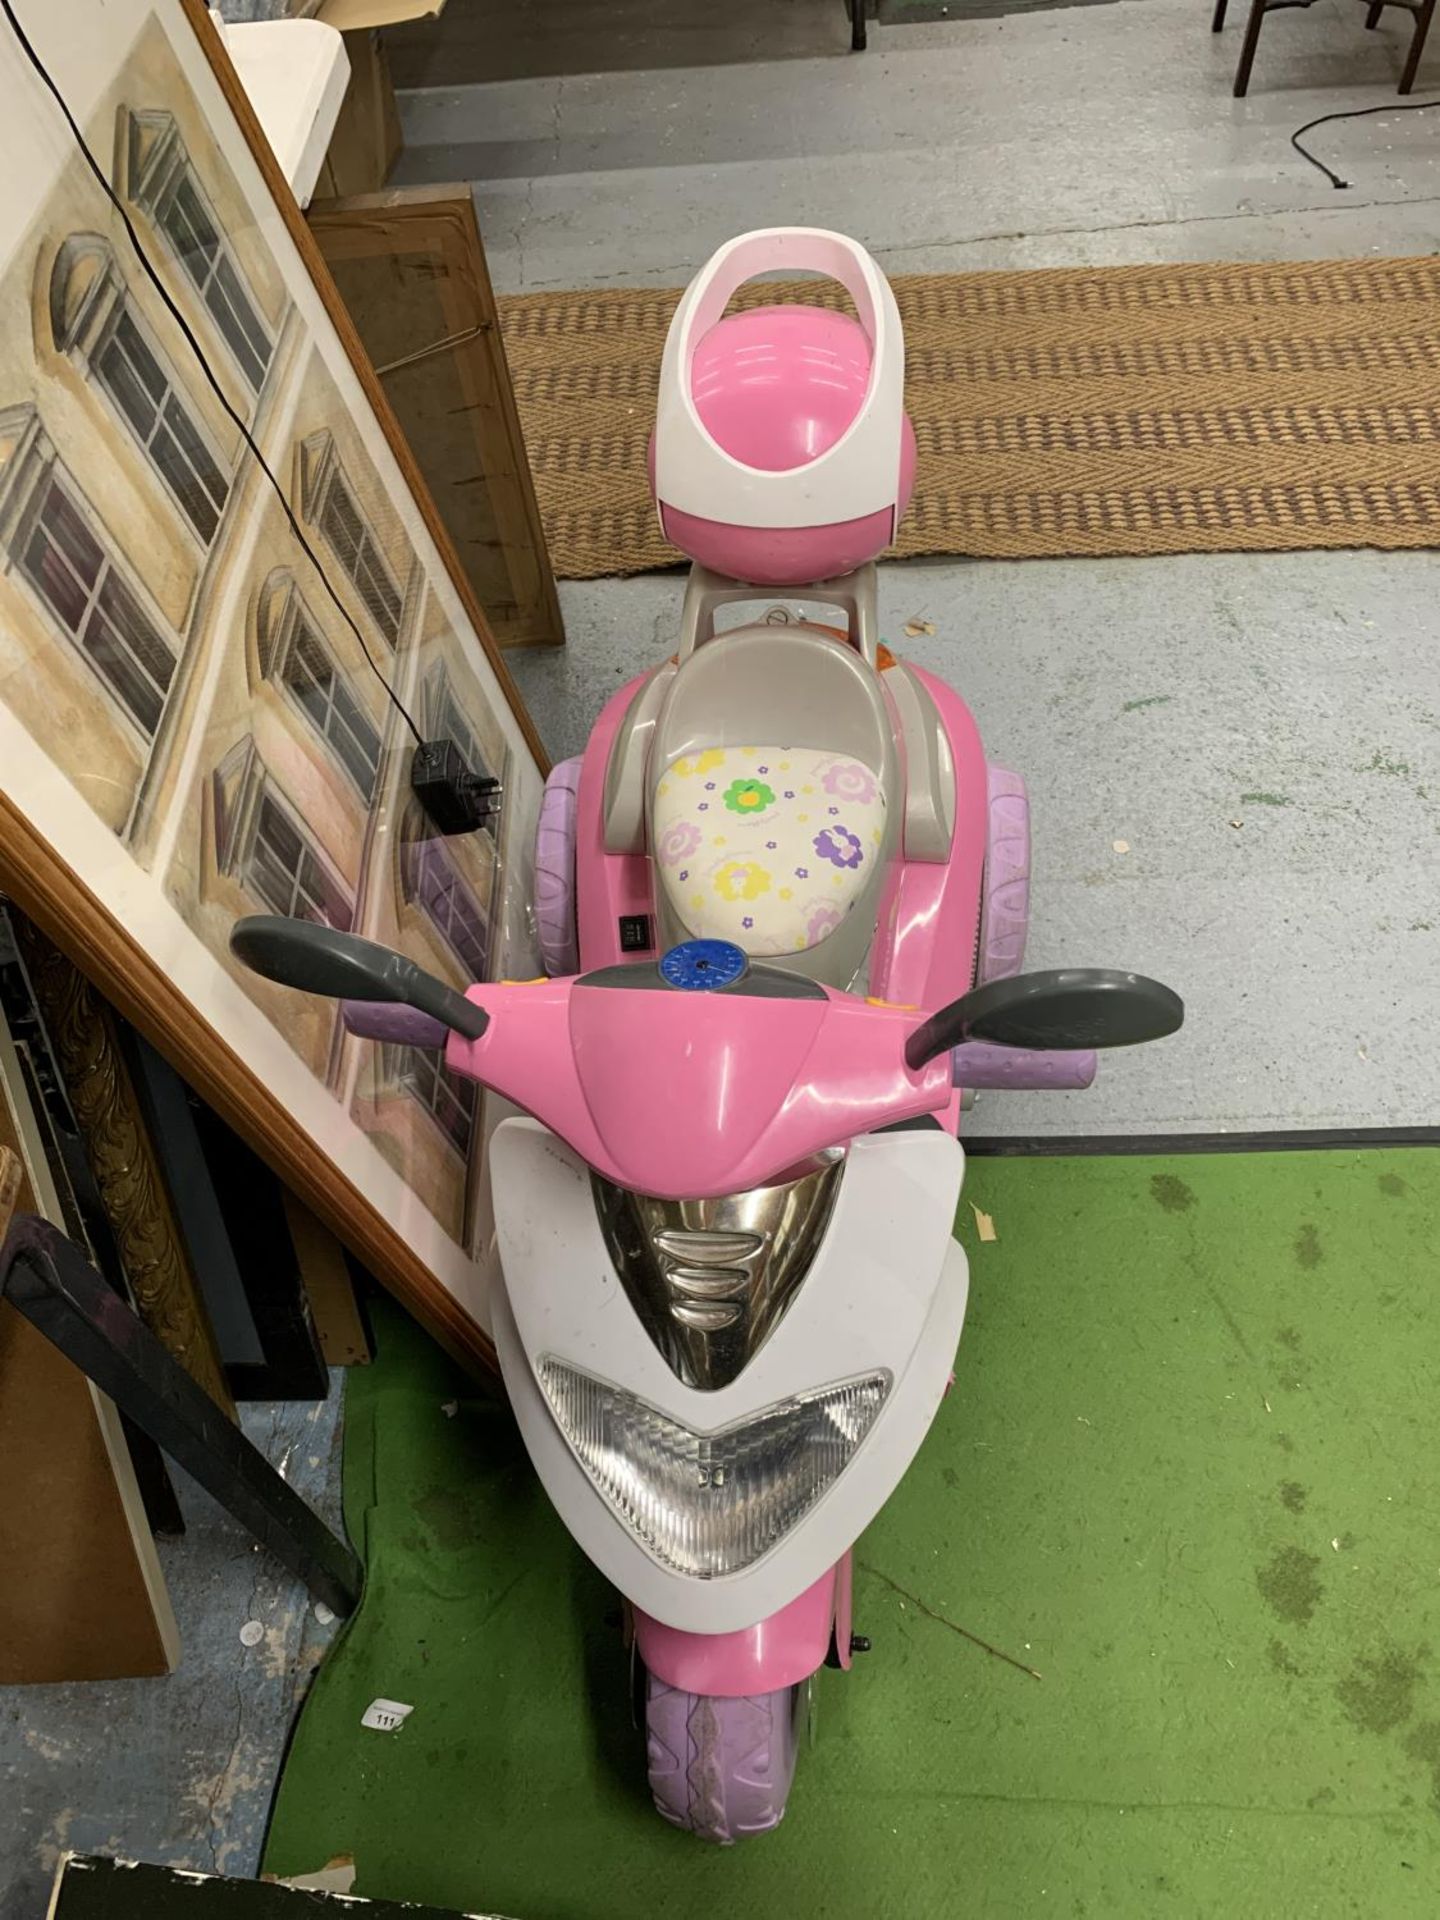 A CHILDREN'S PINK ELECTRIC THREE WHEELED SCOOTER WITH CHARGER - VENDOR STATES IN WORKING ORDER AND